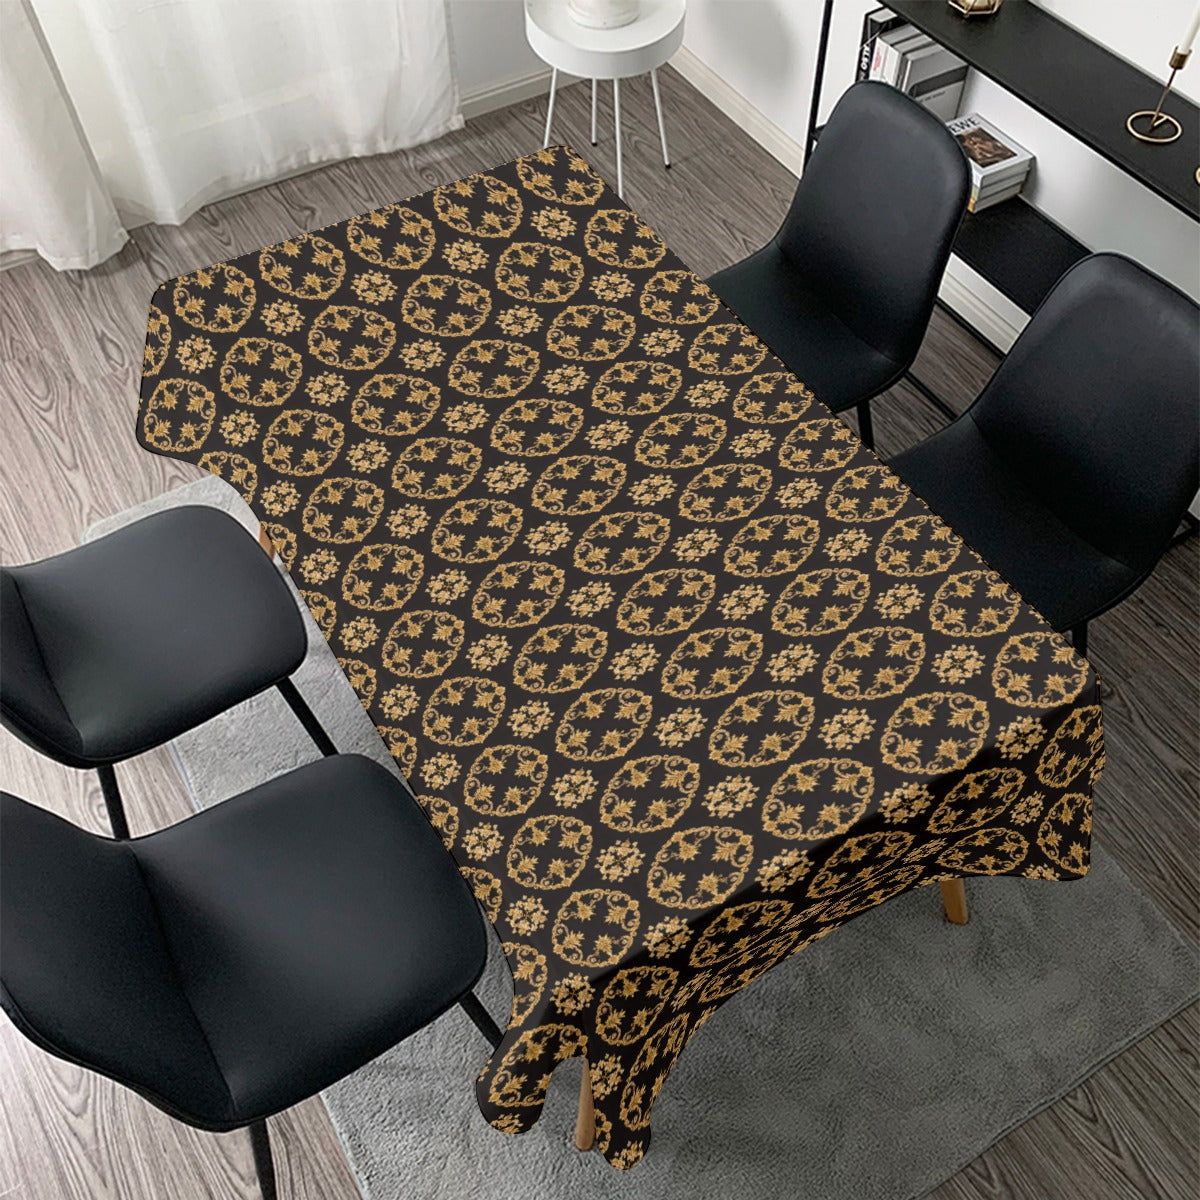 AC BAROQUE "Bellamy" Tablecloth (Over Size)